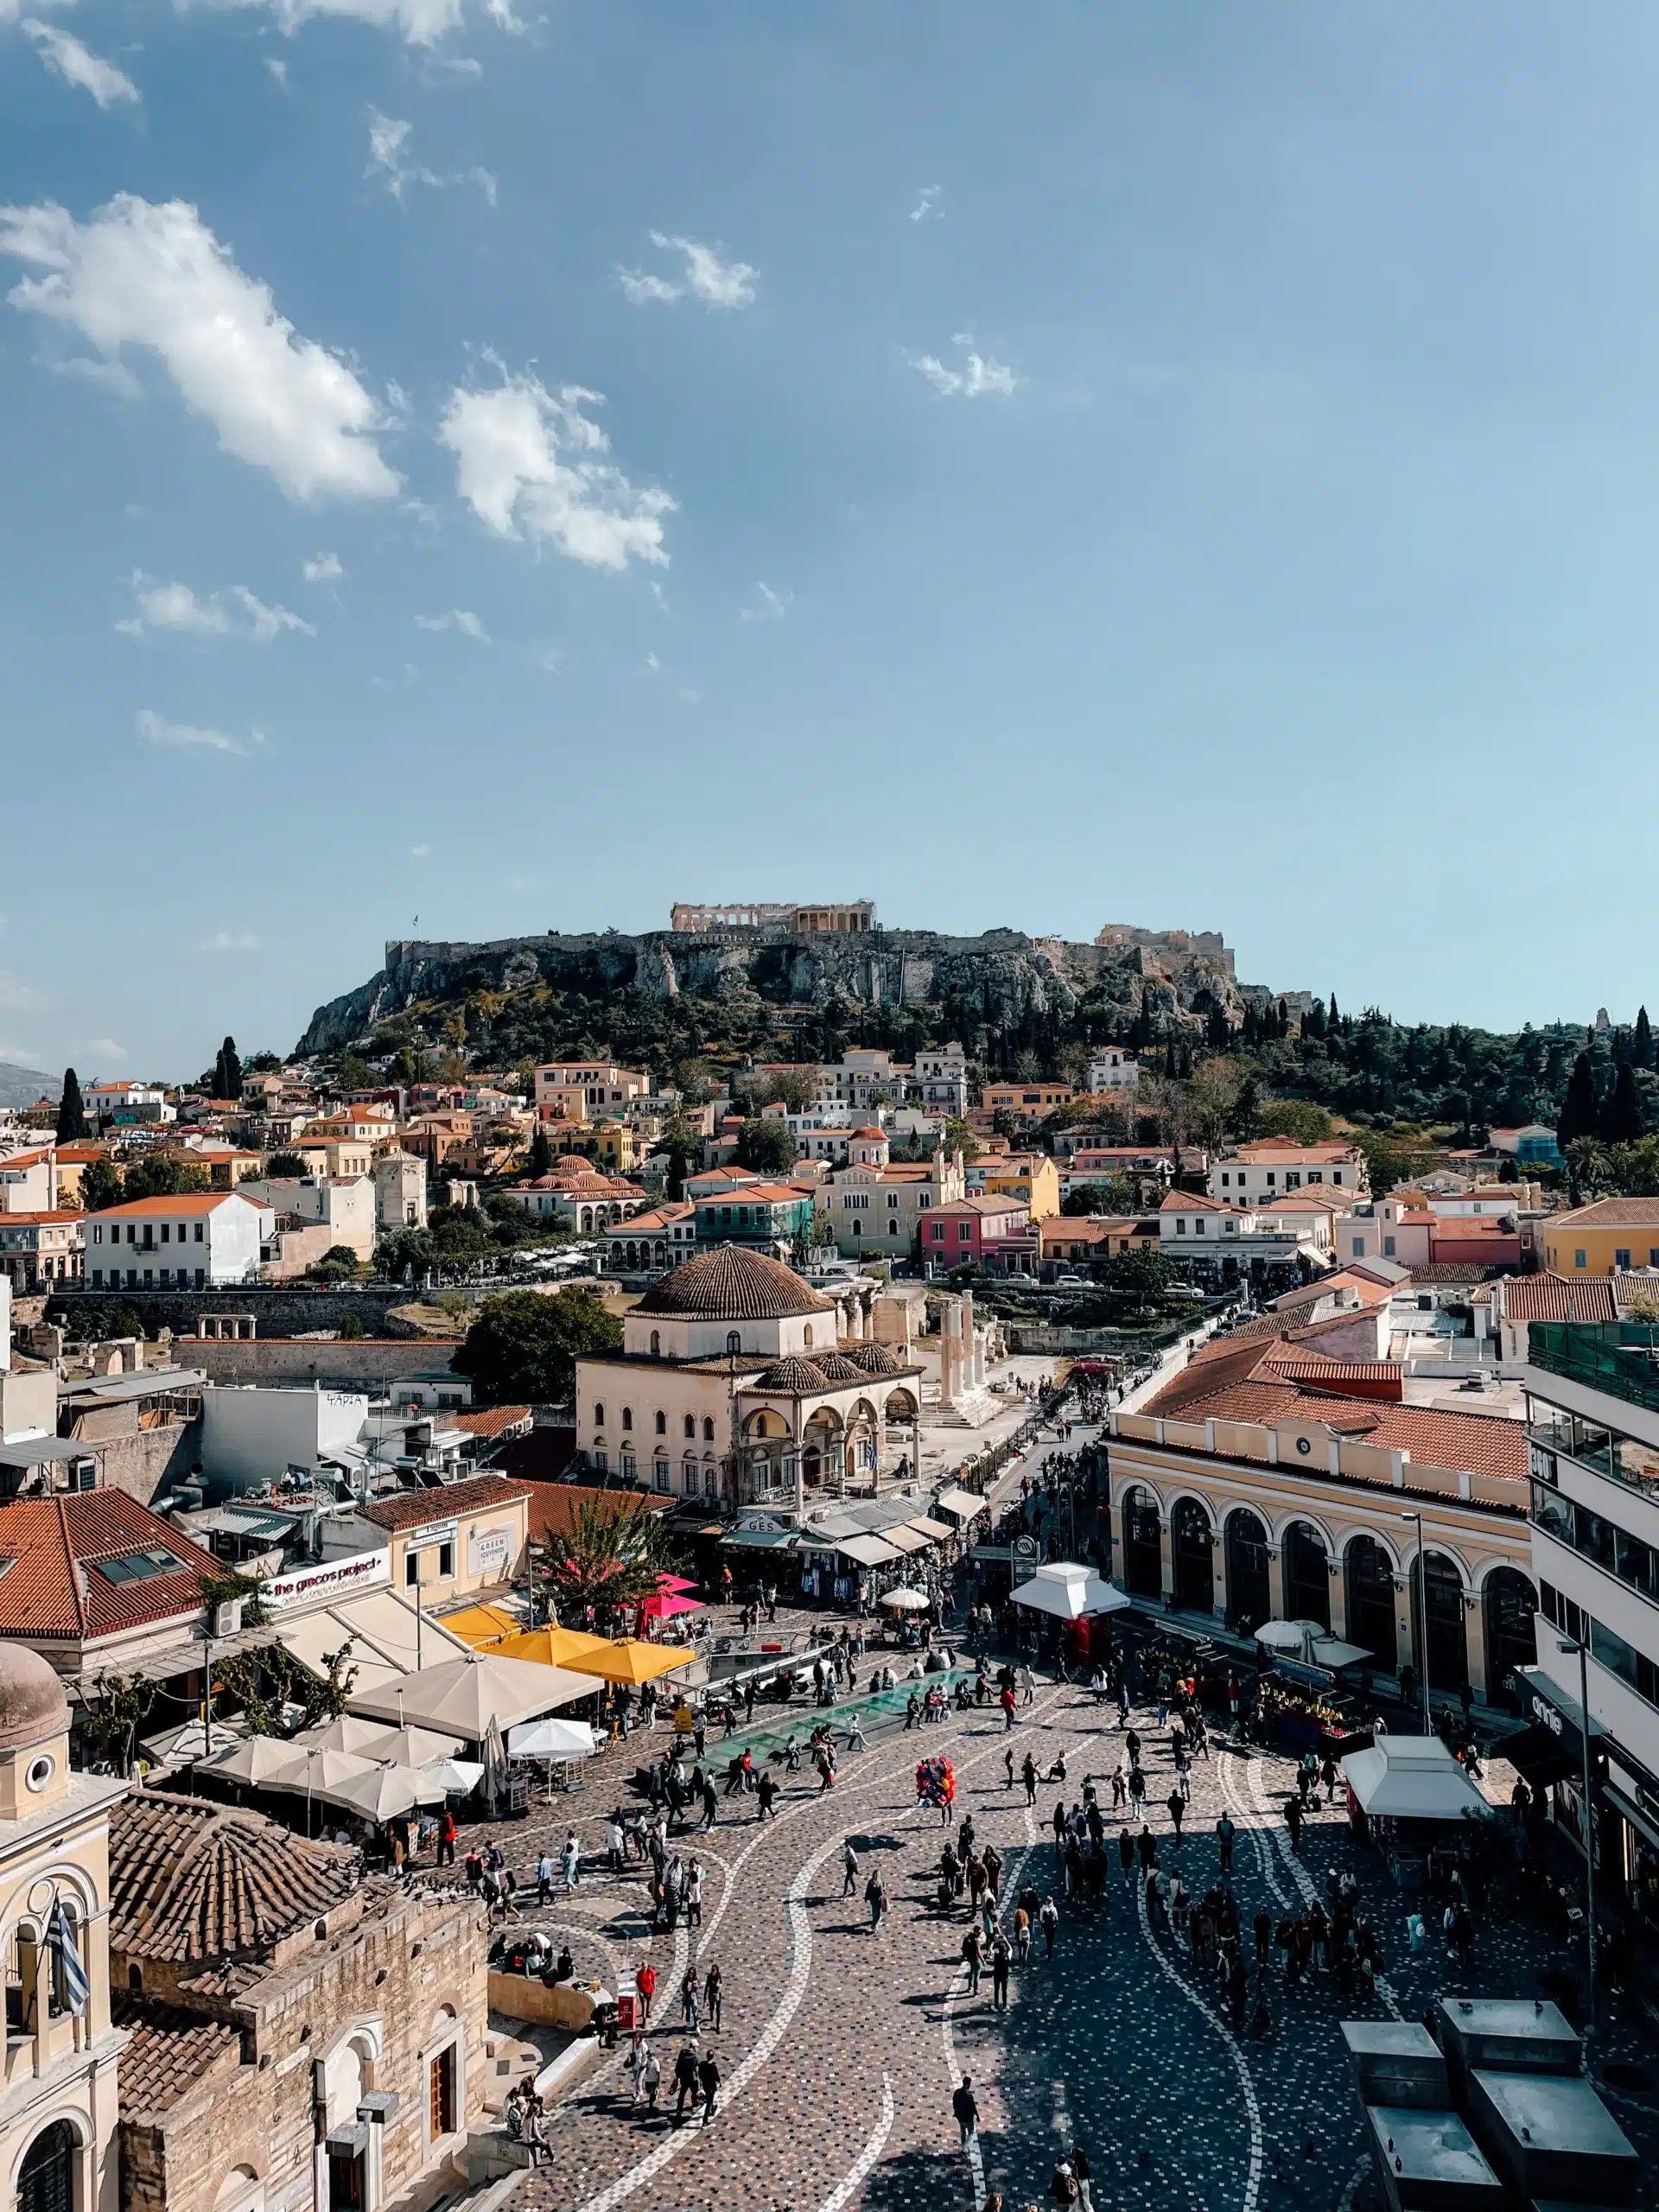 A view overlooking Monastiraki square with the Acropolis sitting in the background